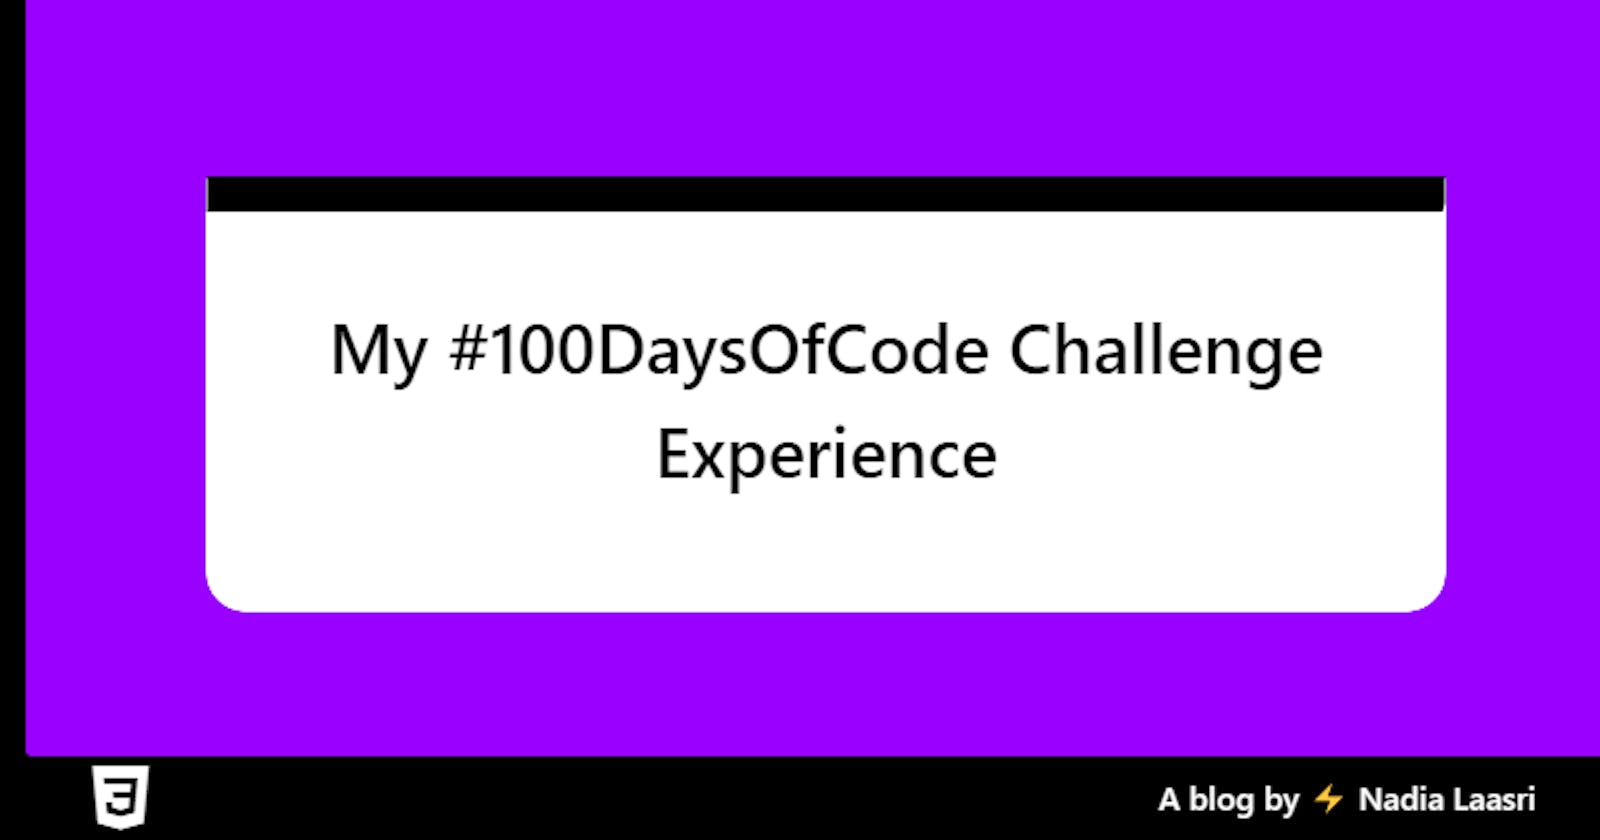 My #100DaysOfCode Challenge Experience Went Well!